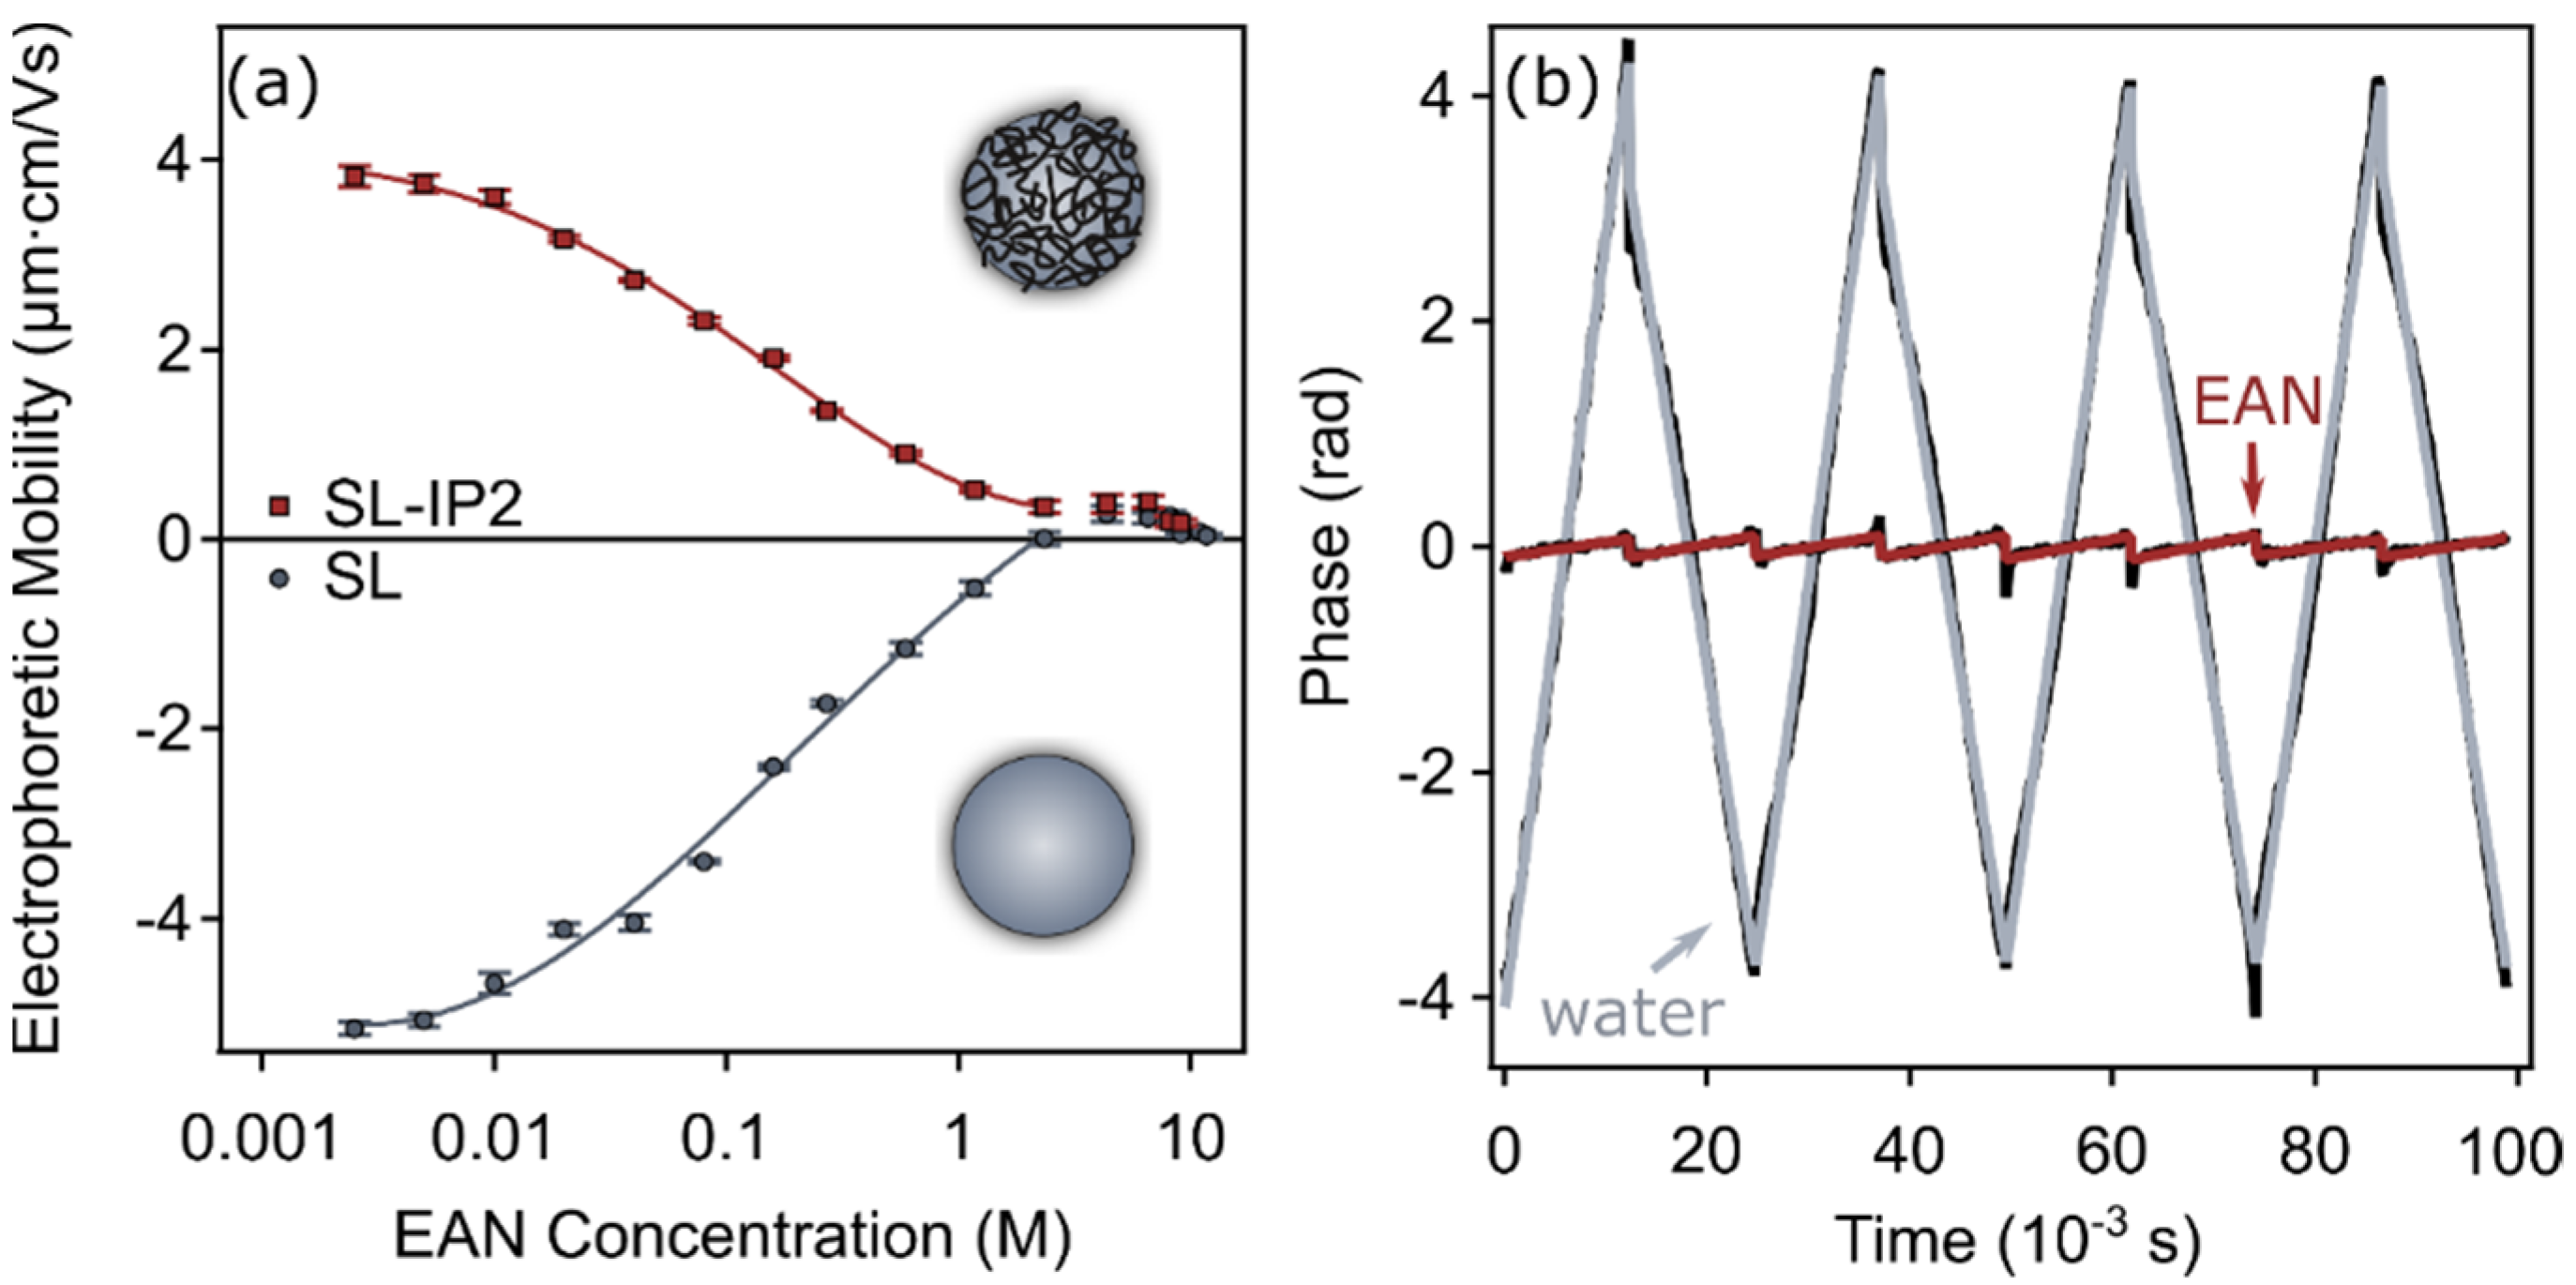 Colloids and Interfaces | Free Full-Text | Effect of Water and Salt on the  Colloidal Stability of Latex Particles in Ionic Liquid Solutions | HTML